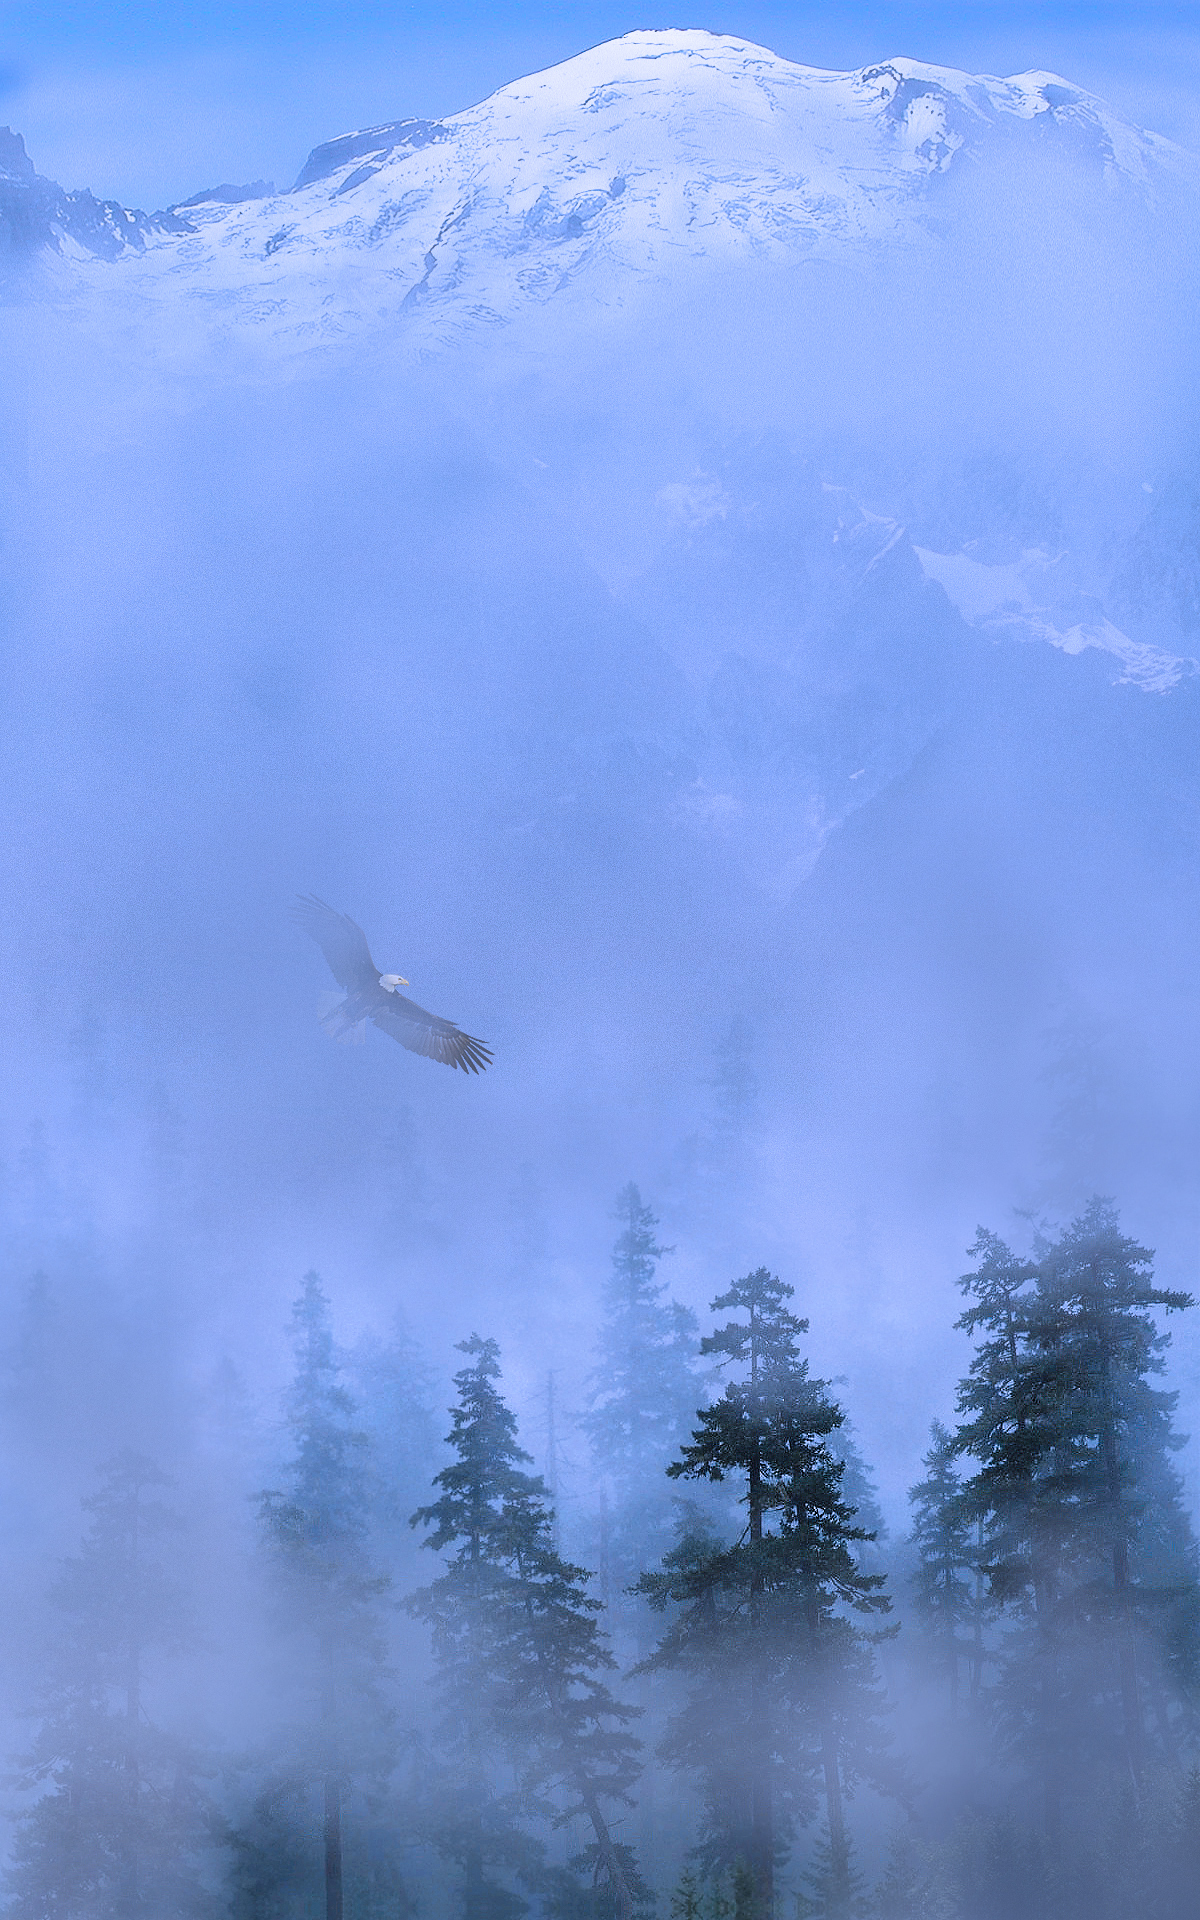 Eagle Flys In Front Of Snow Capped Mountain Over Trees Through Blue